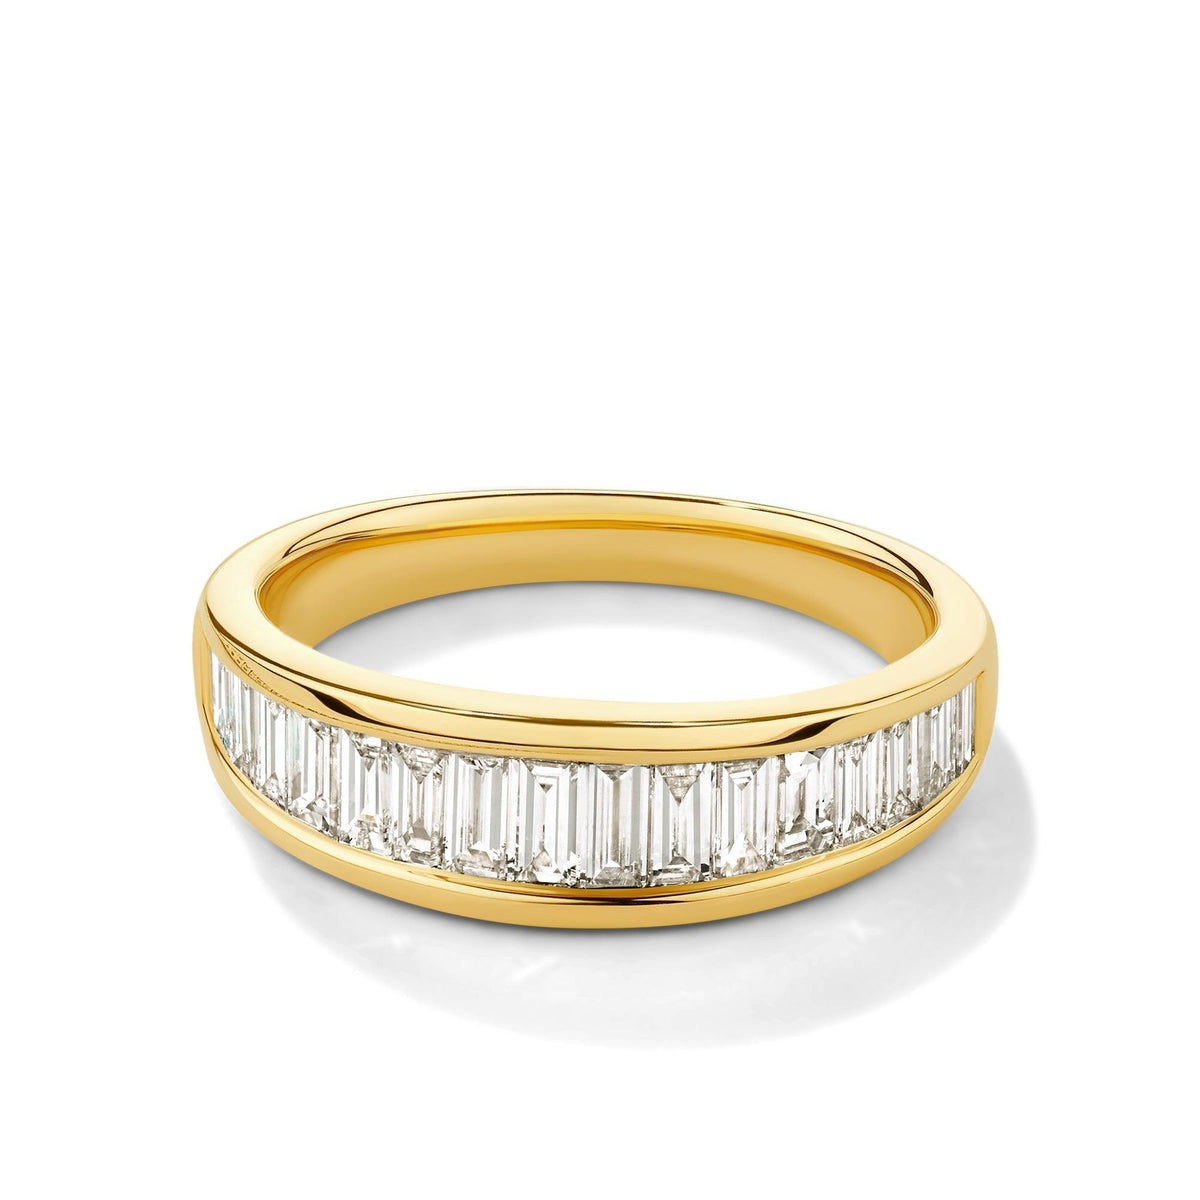 1ct TW Diamond Baguette Ring in 9ct Yellow Gold - Wallace Bishop